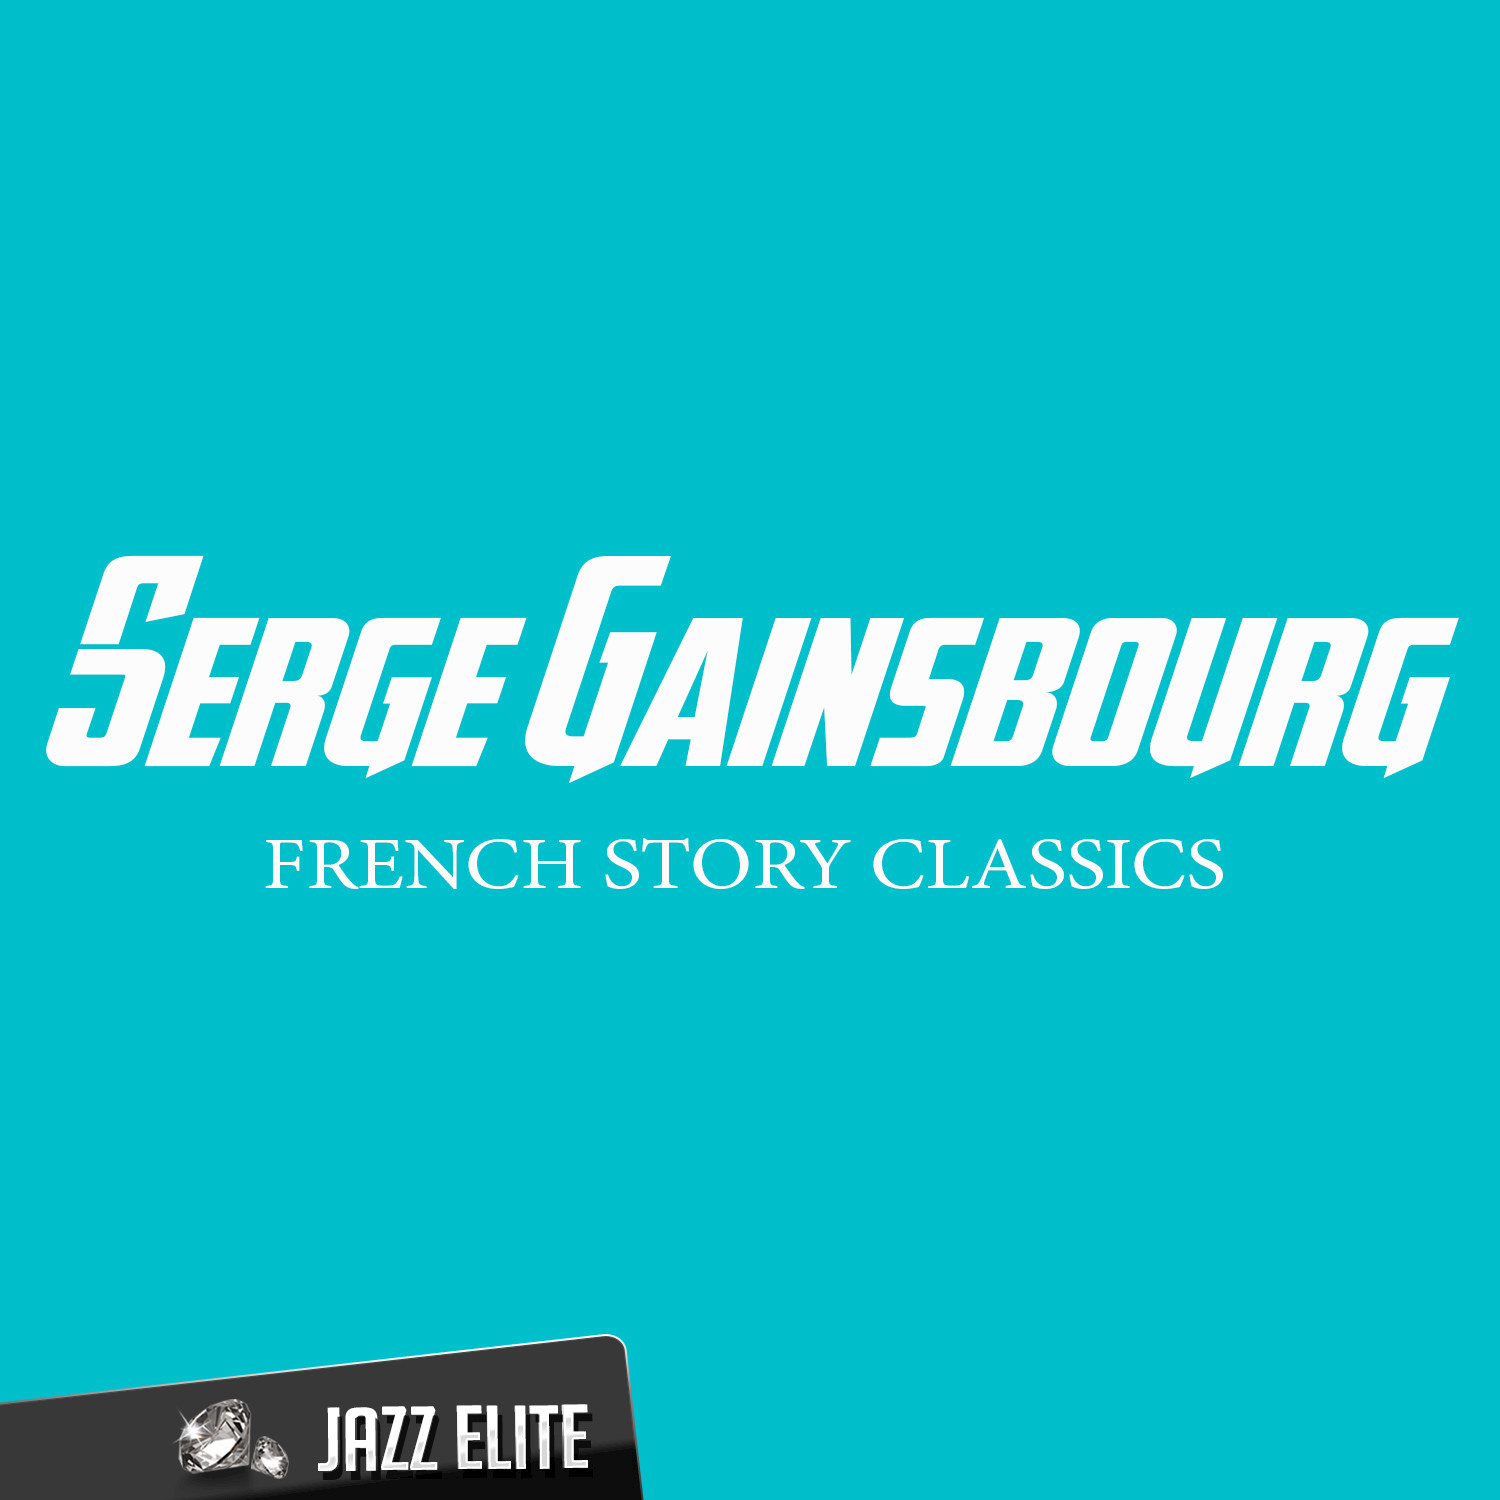 French Story Classics